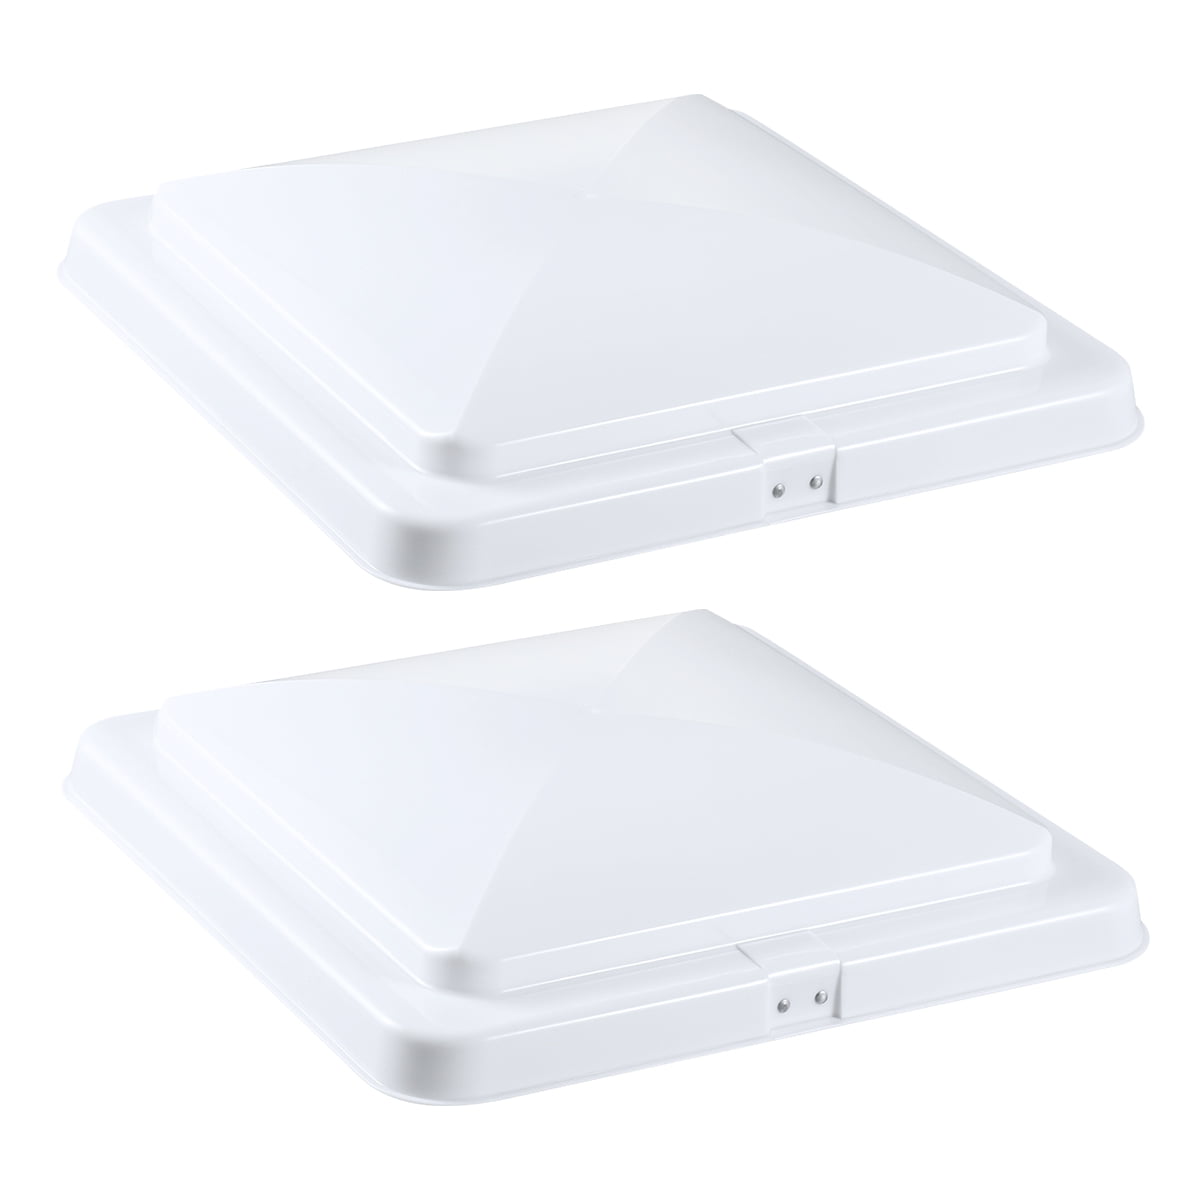 RV Roof Vent Lid Cover Universal Replacement 14 Inch White for Camper Trailer, 2 Packs Walmart